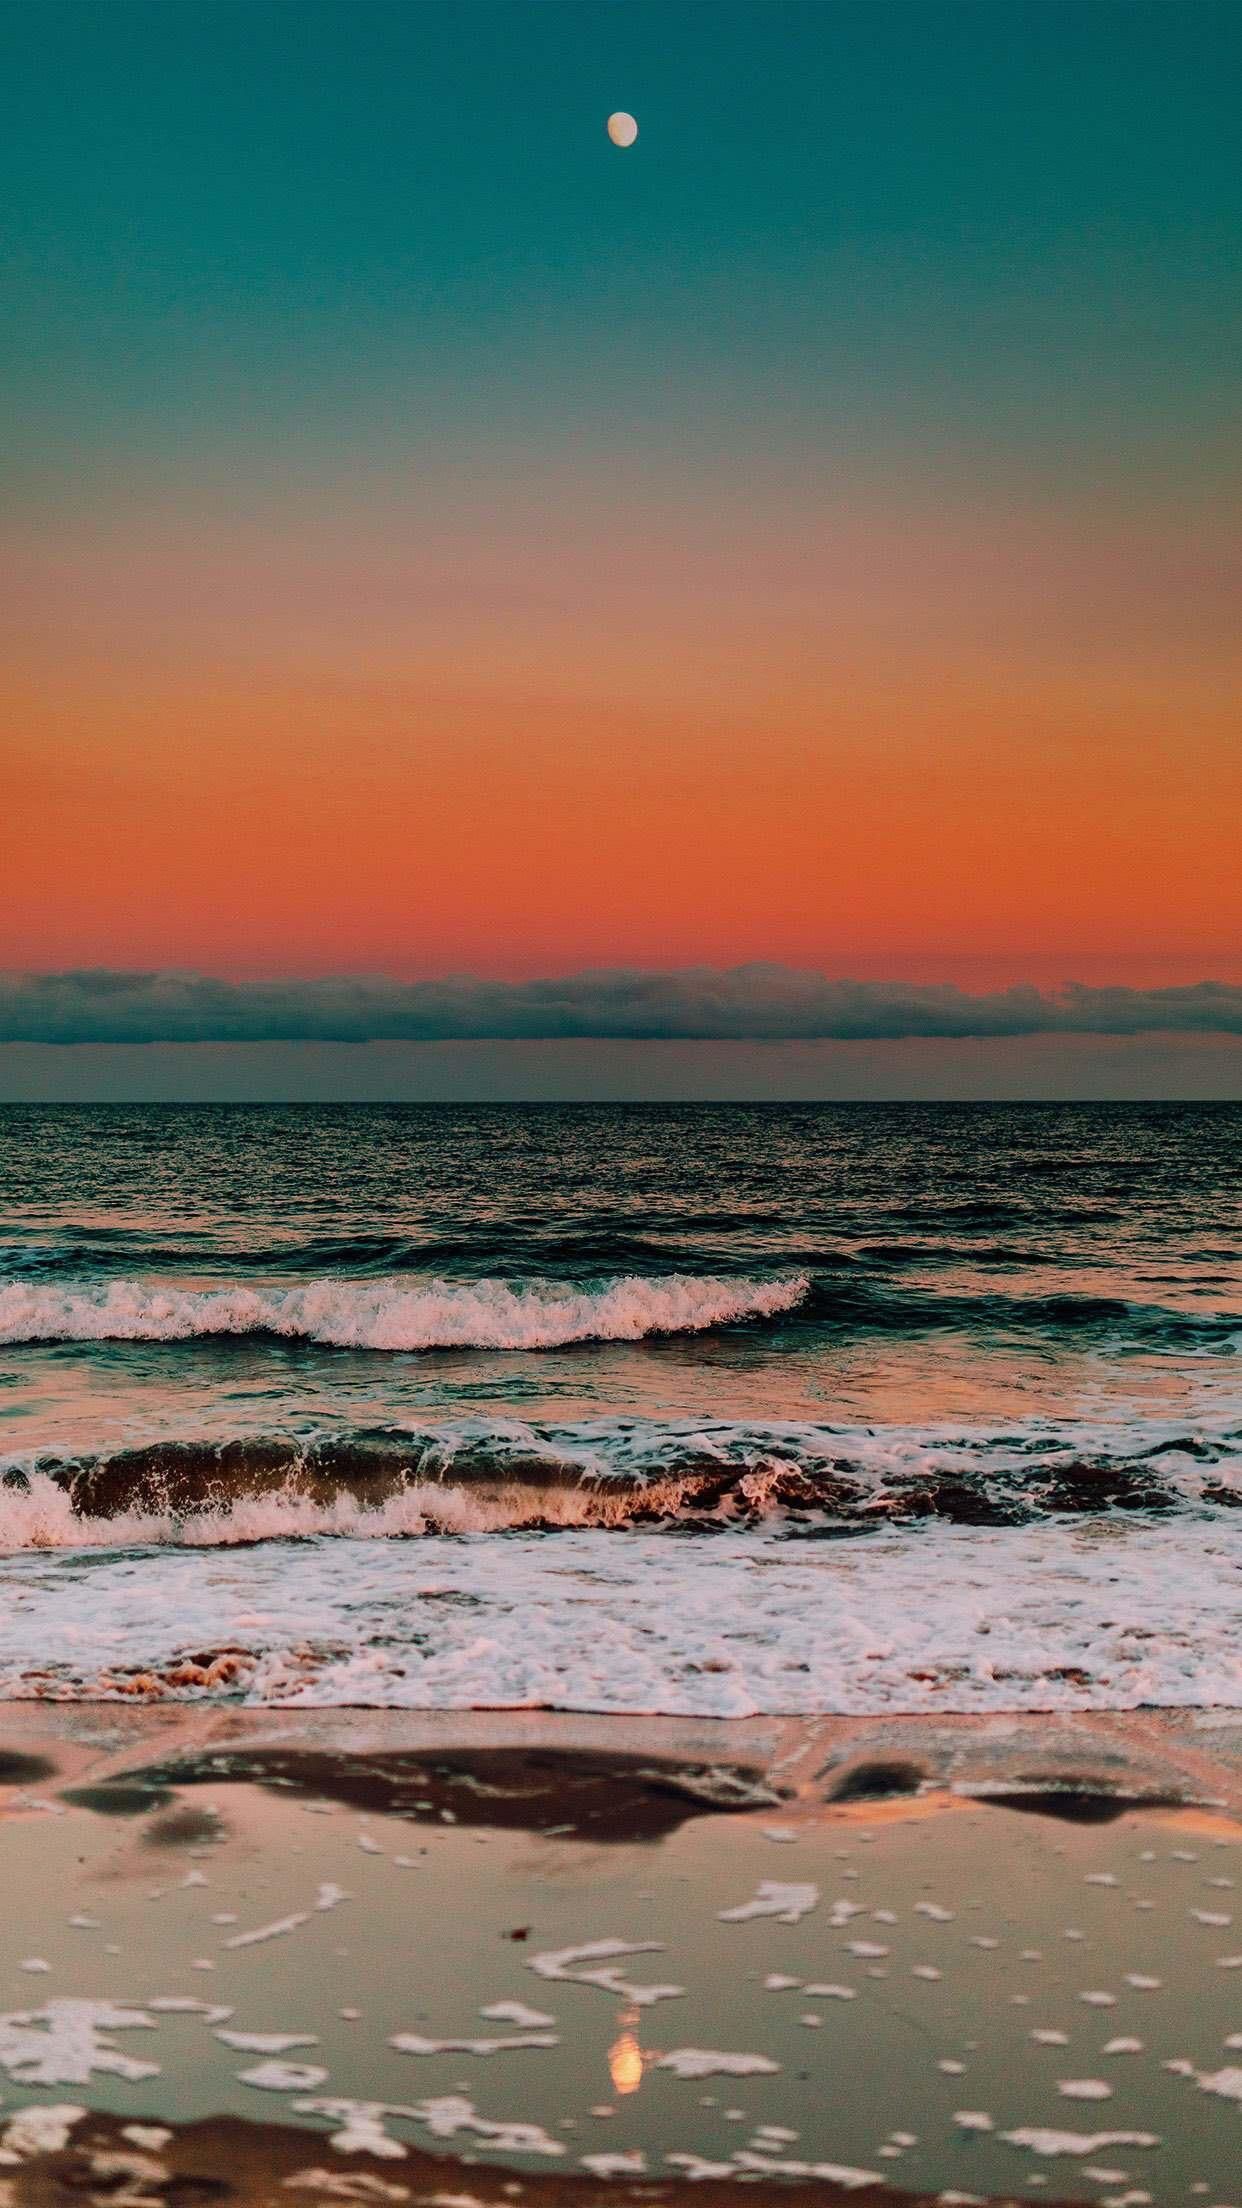 A photo of the ocean at sunset with the moon in the sky. - Photography, water, beach, summer, sunset, tropical, coast, ocean